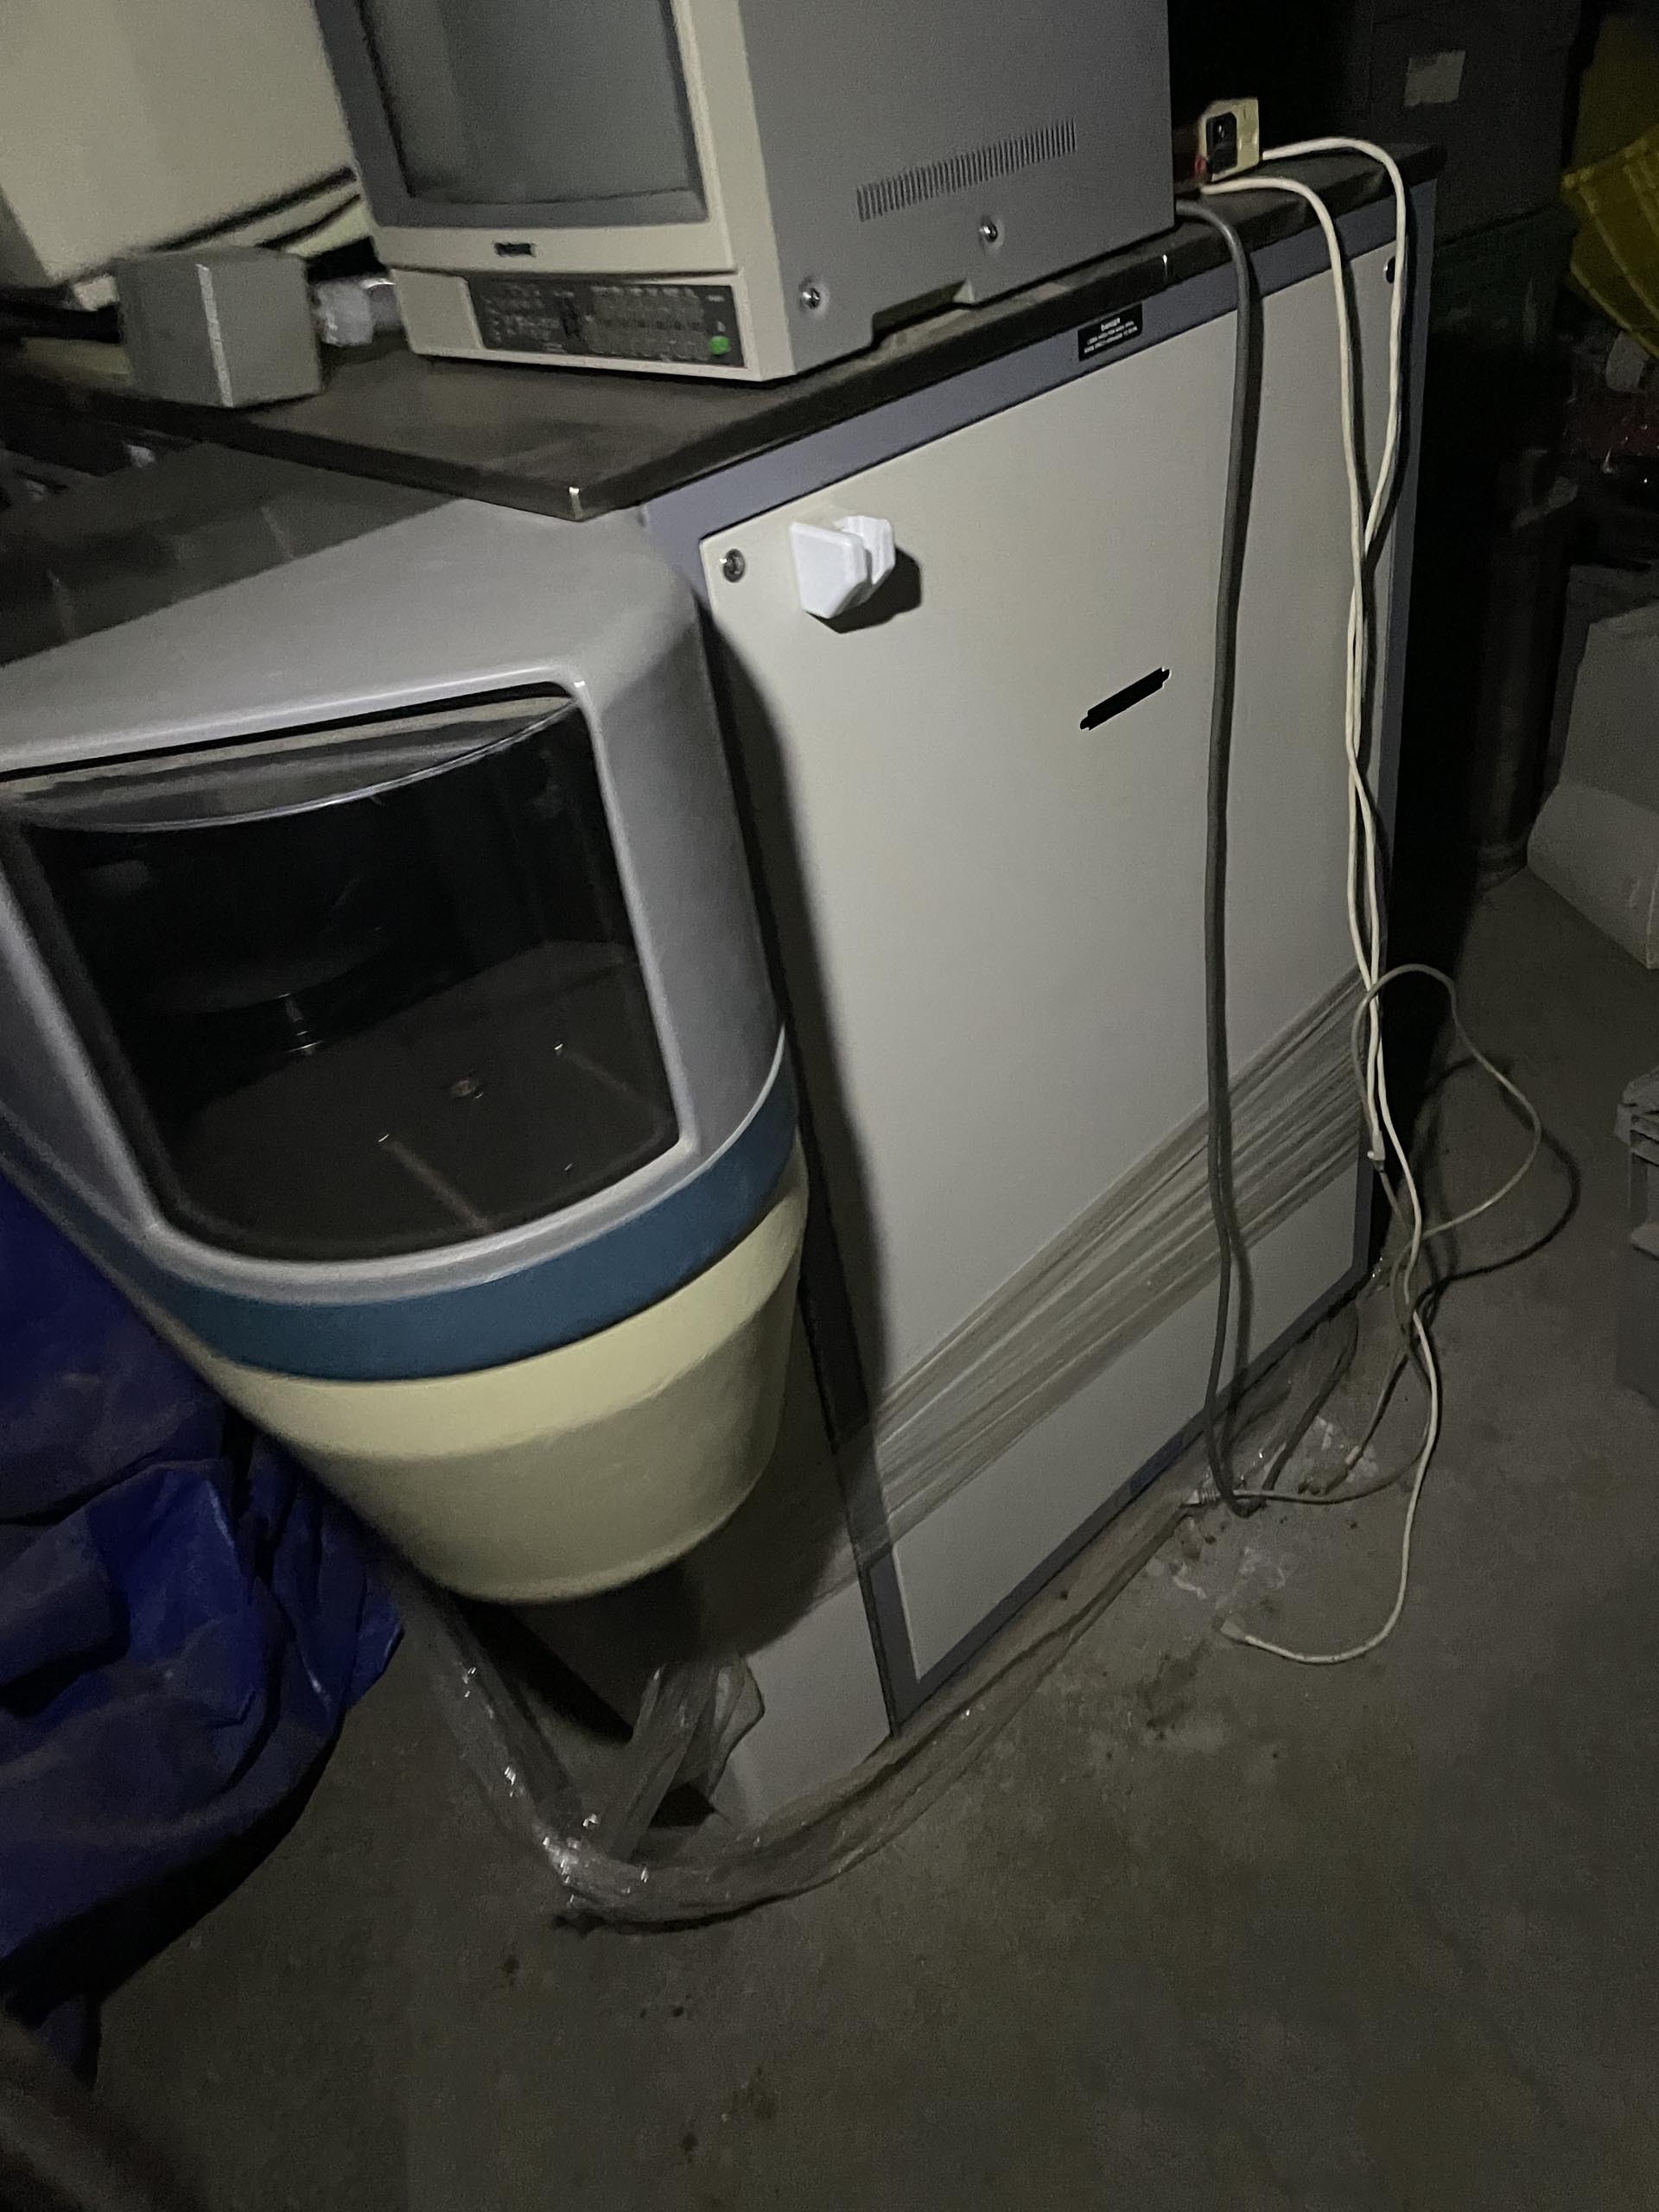 Photo Used THERMA-WAVE TP 300 For Sale